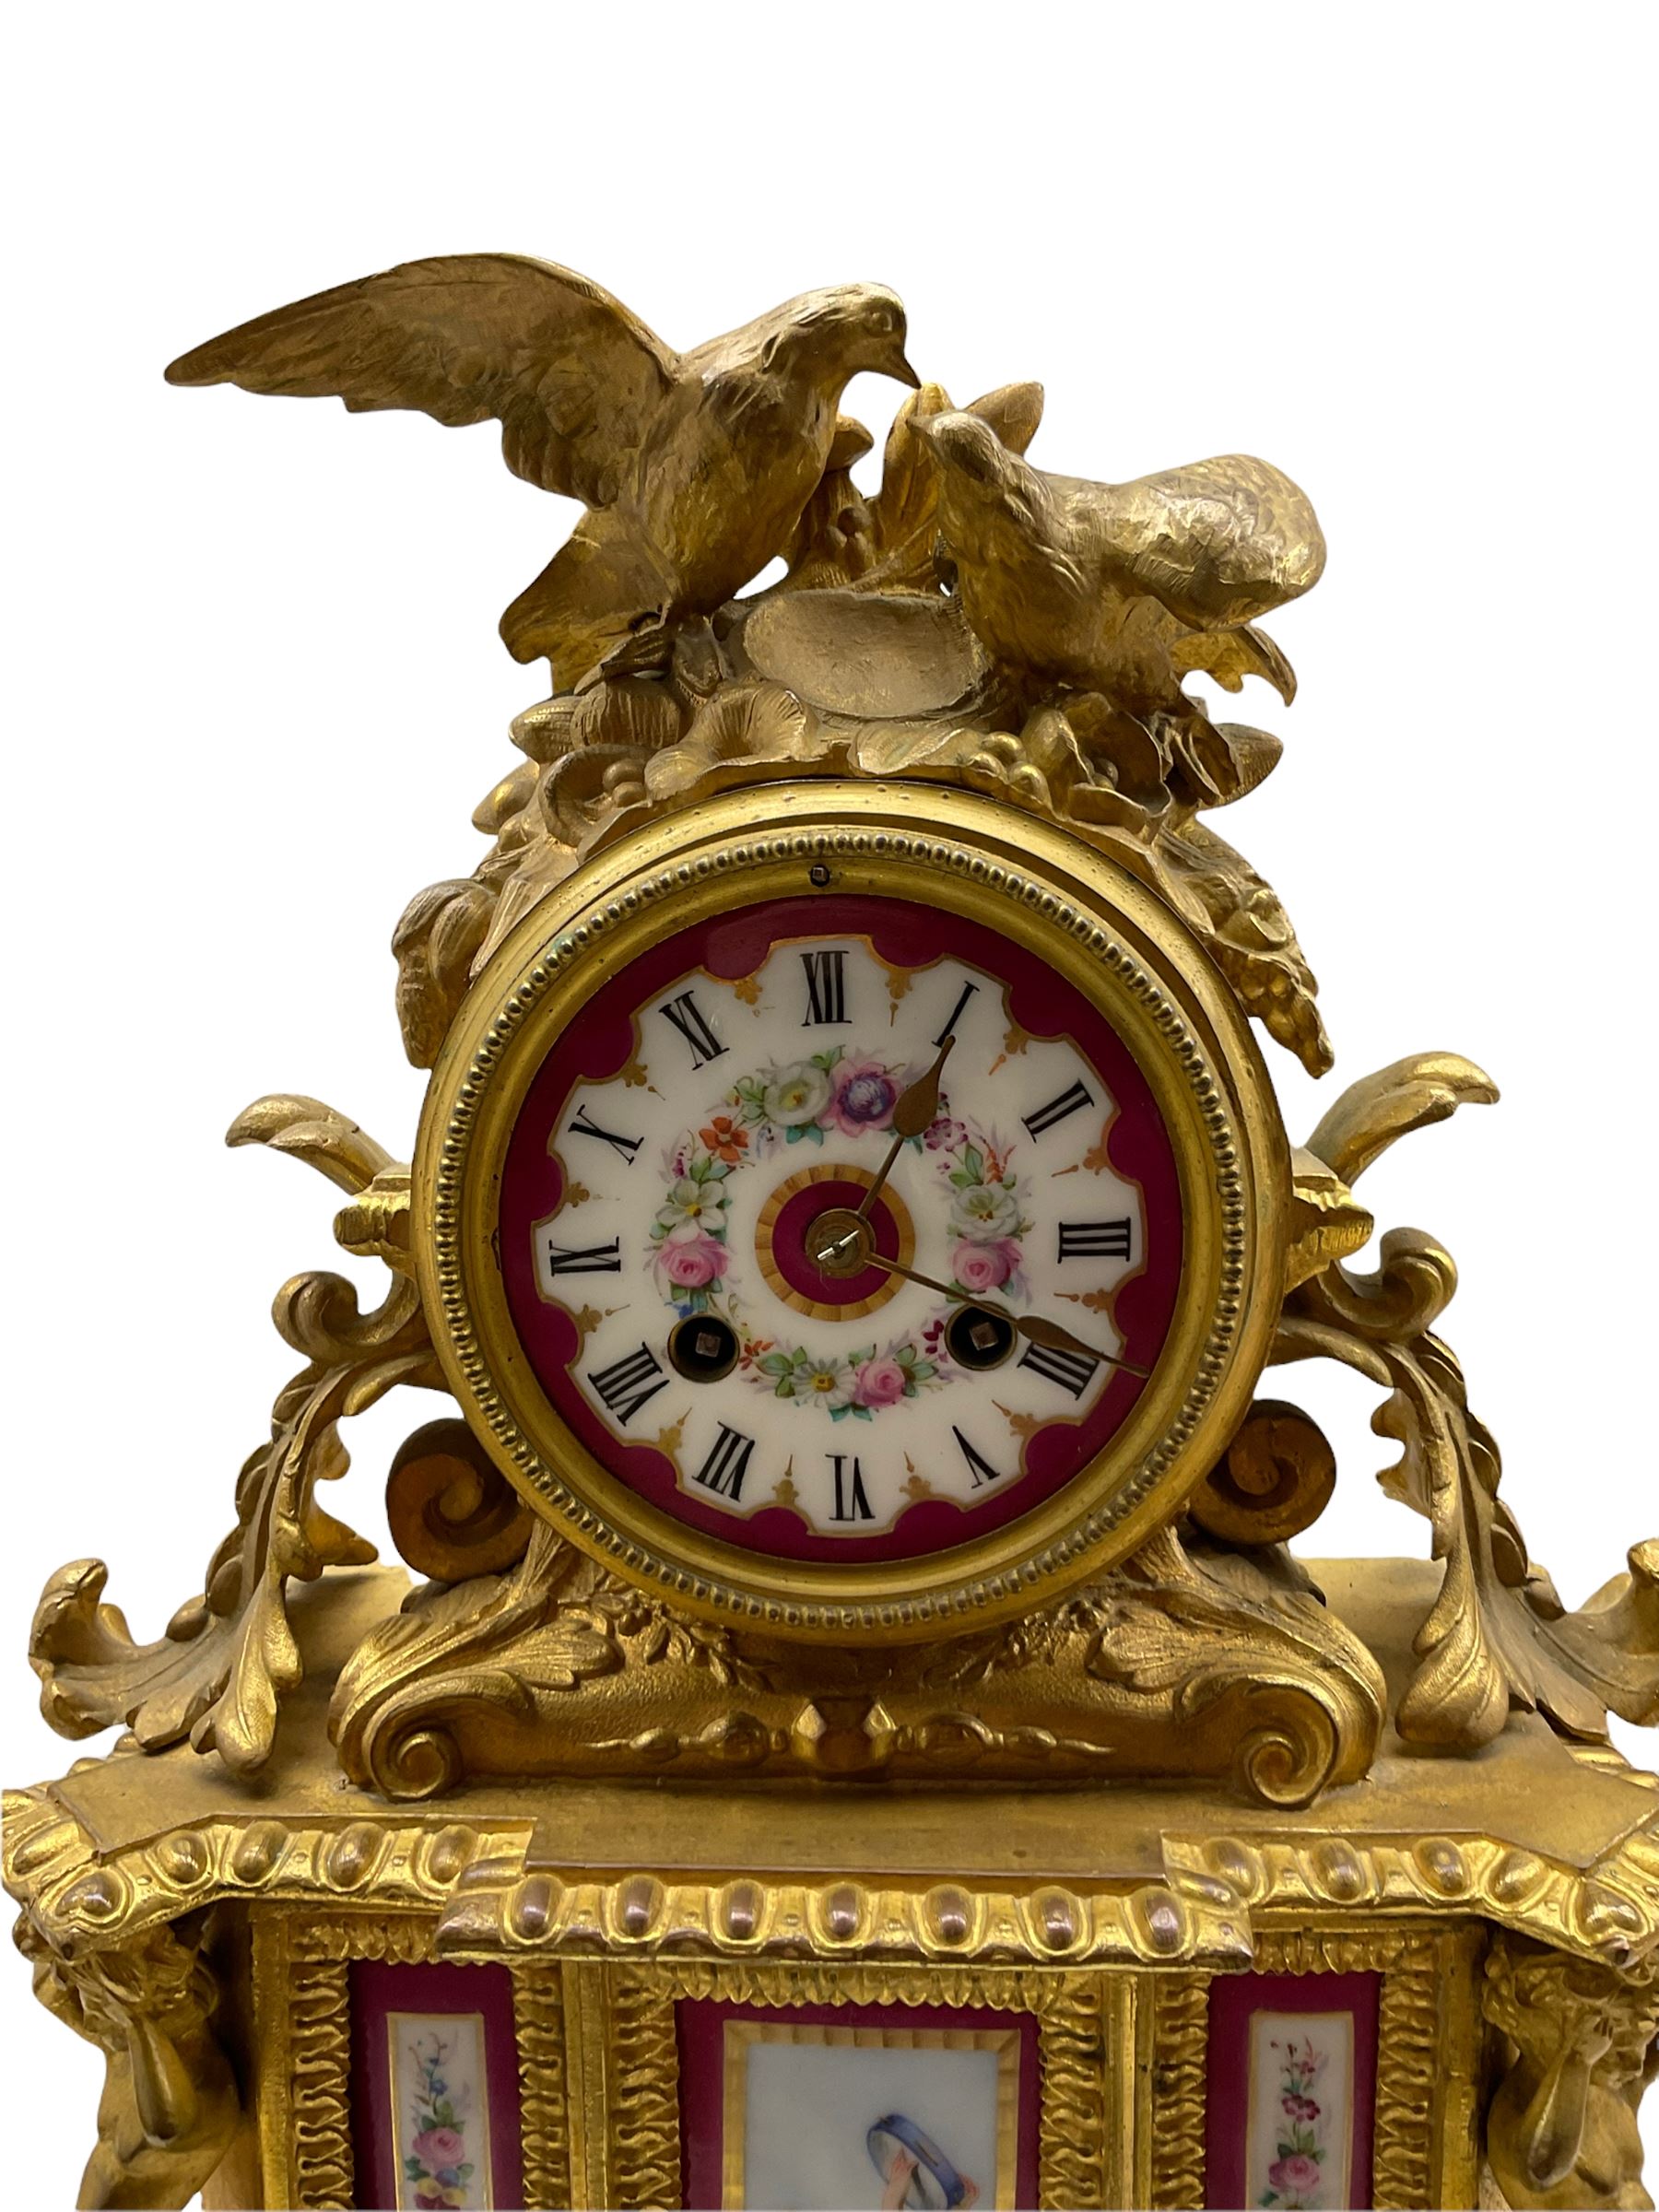 French Napoleon III mantle clock in a gilt speller rococo case surmounted by two birds taking flight - Image 3 of 4